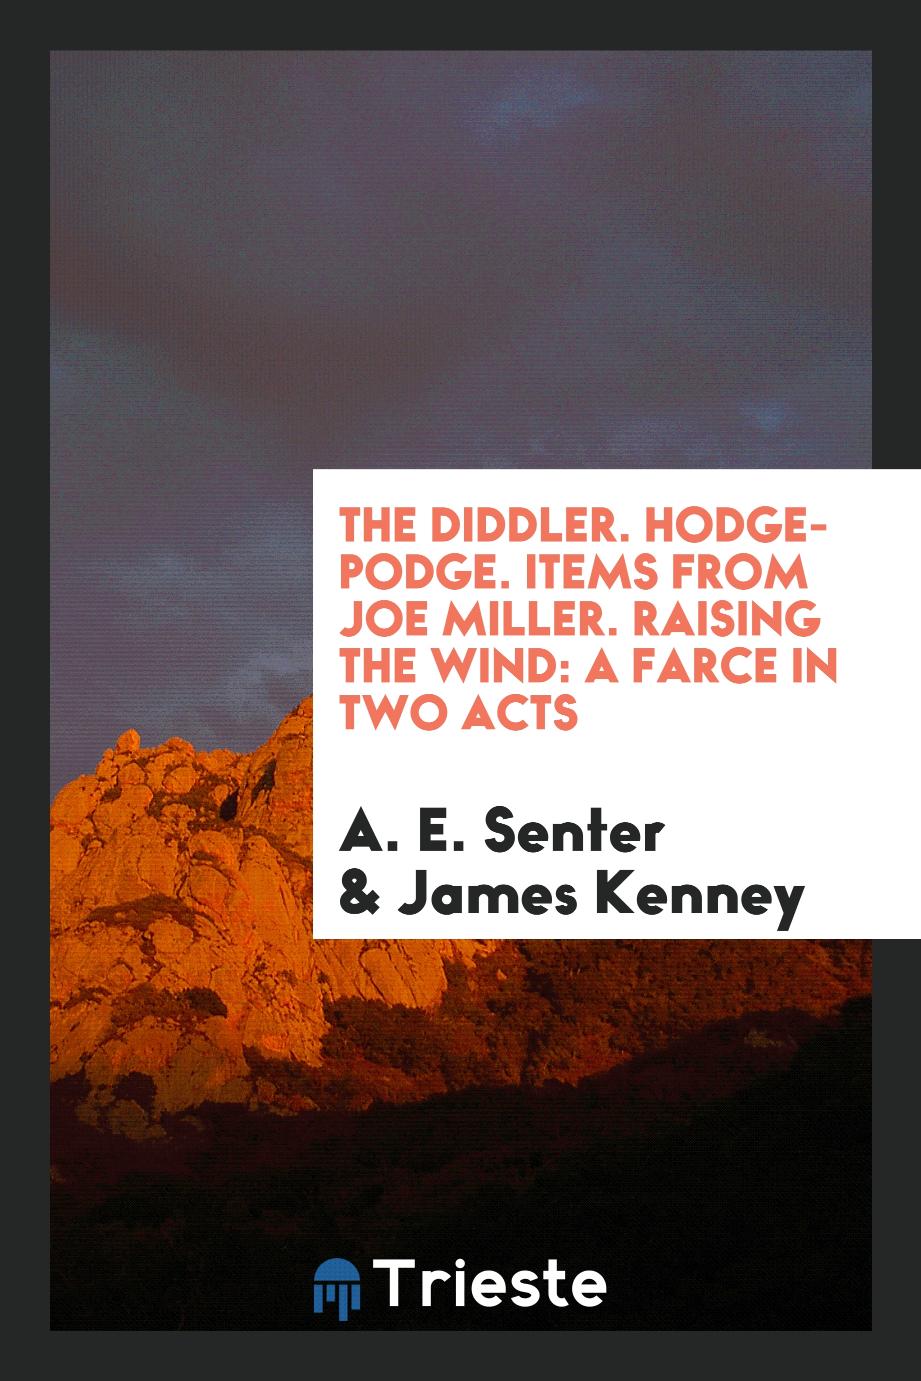 The diddler. Hodge-podge. Items from Joe Miller. Raising the wind: a farce in two acts